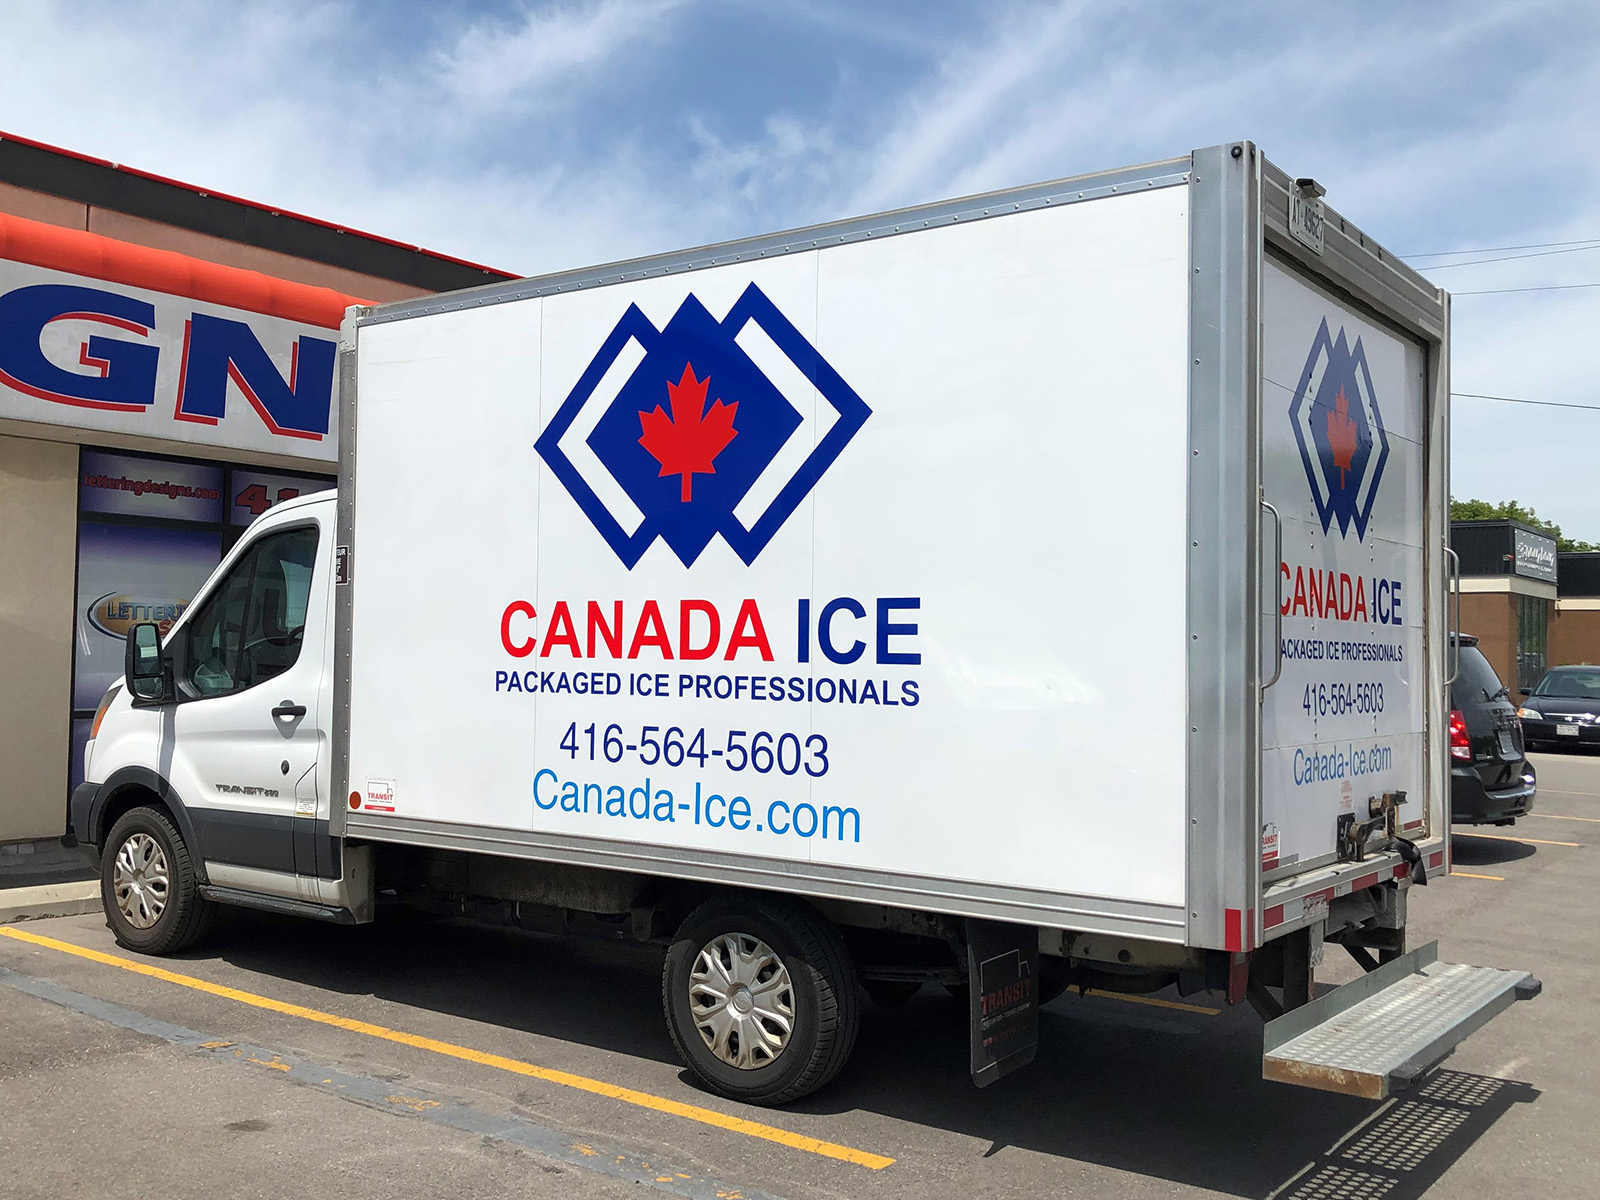 Vehicle Wraps and Vehicle Lettering to Promote Your Business - LETTERING deSigns in Scarborough Car and Truck Wraps Designs